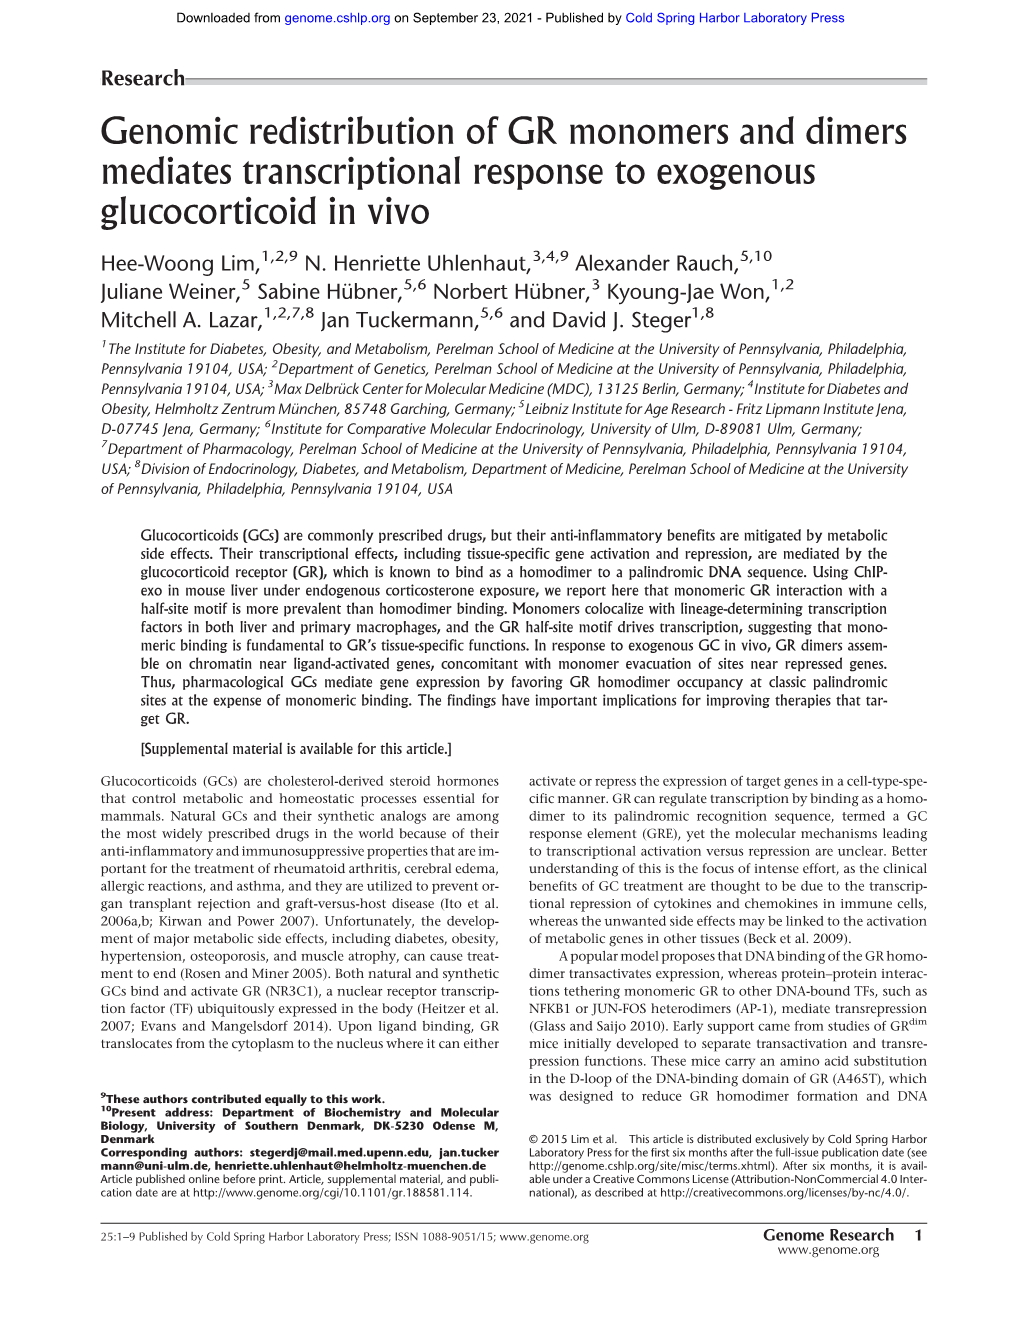 Genomic Redistribution of GR Monomers and Dimers Mediates Transcriptional Response to Exogenous Glucocorticoid in Vivo